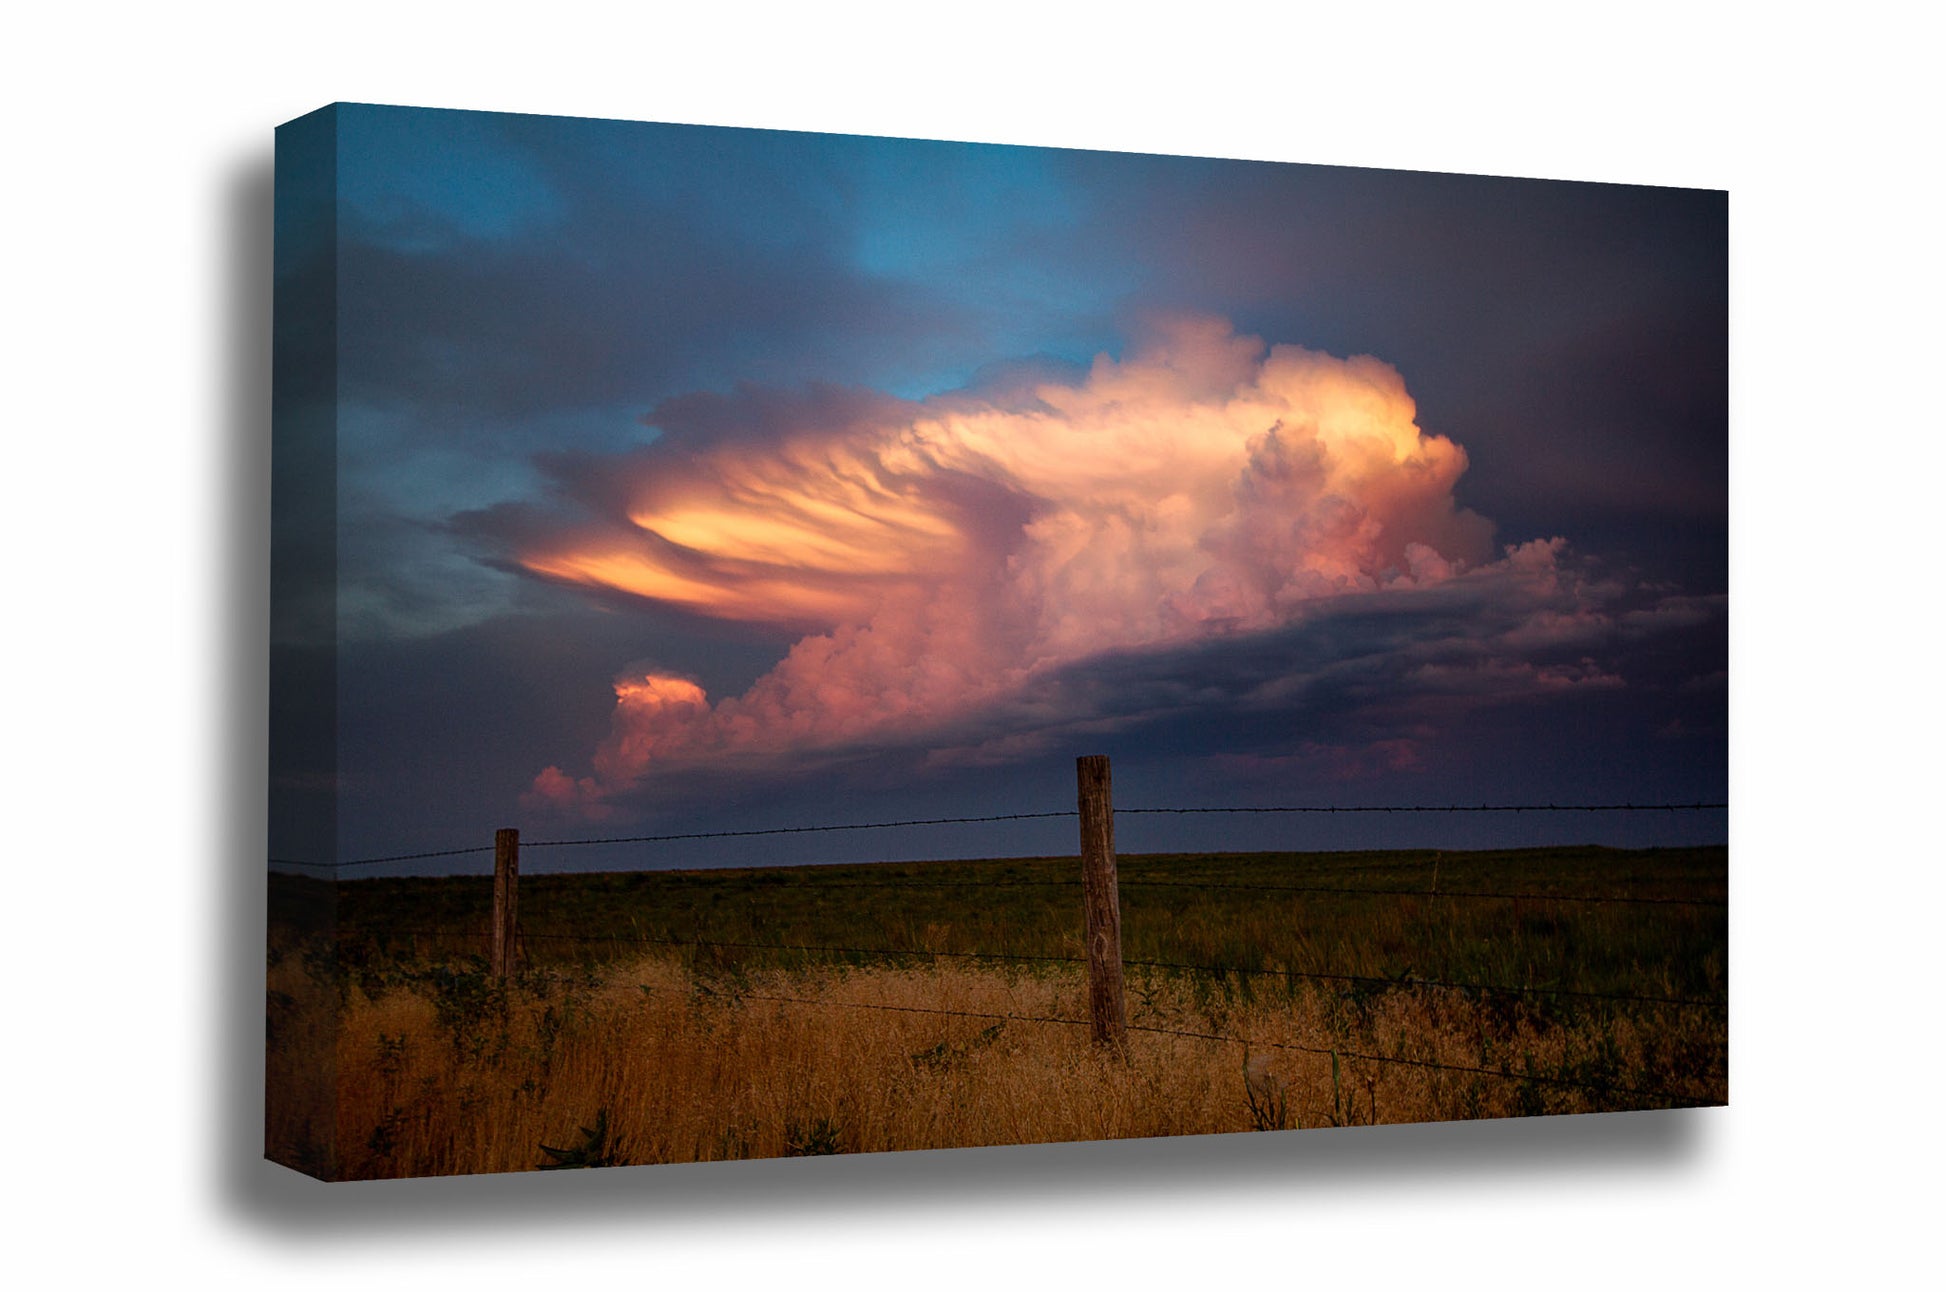 Western canvas wall art of a distant storm cloud drenched in evening sunlight over a barbed wire fence at sunset on a stormy spring evening in Oklahoma by Sean Ramsey of Southern Plains Photography.